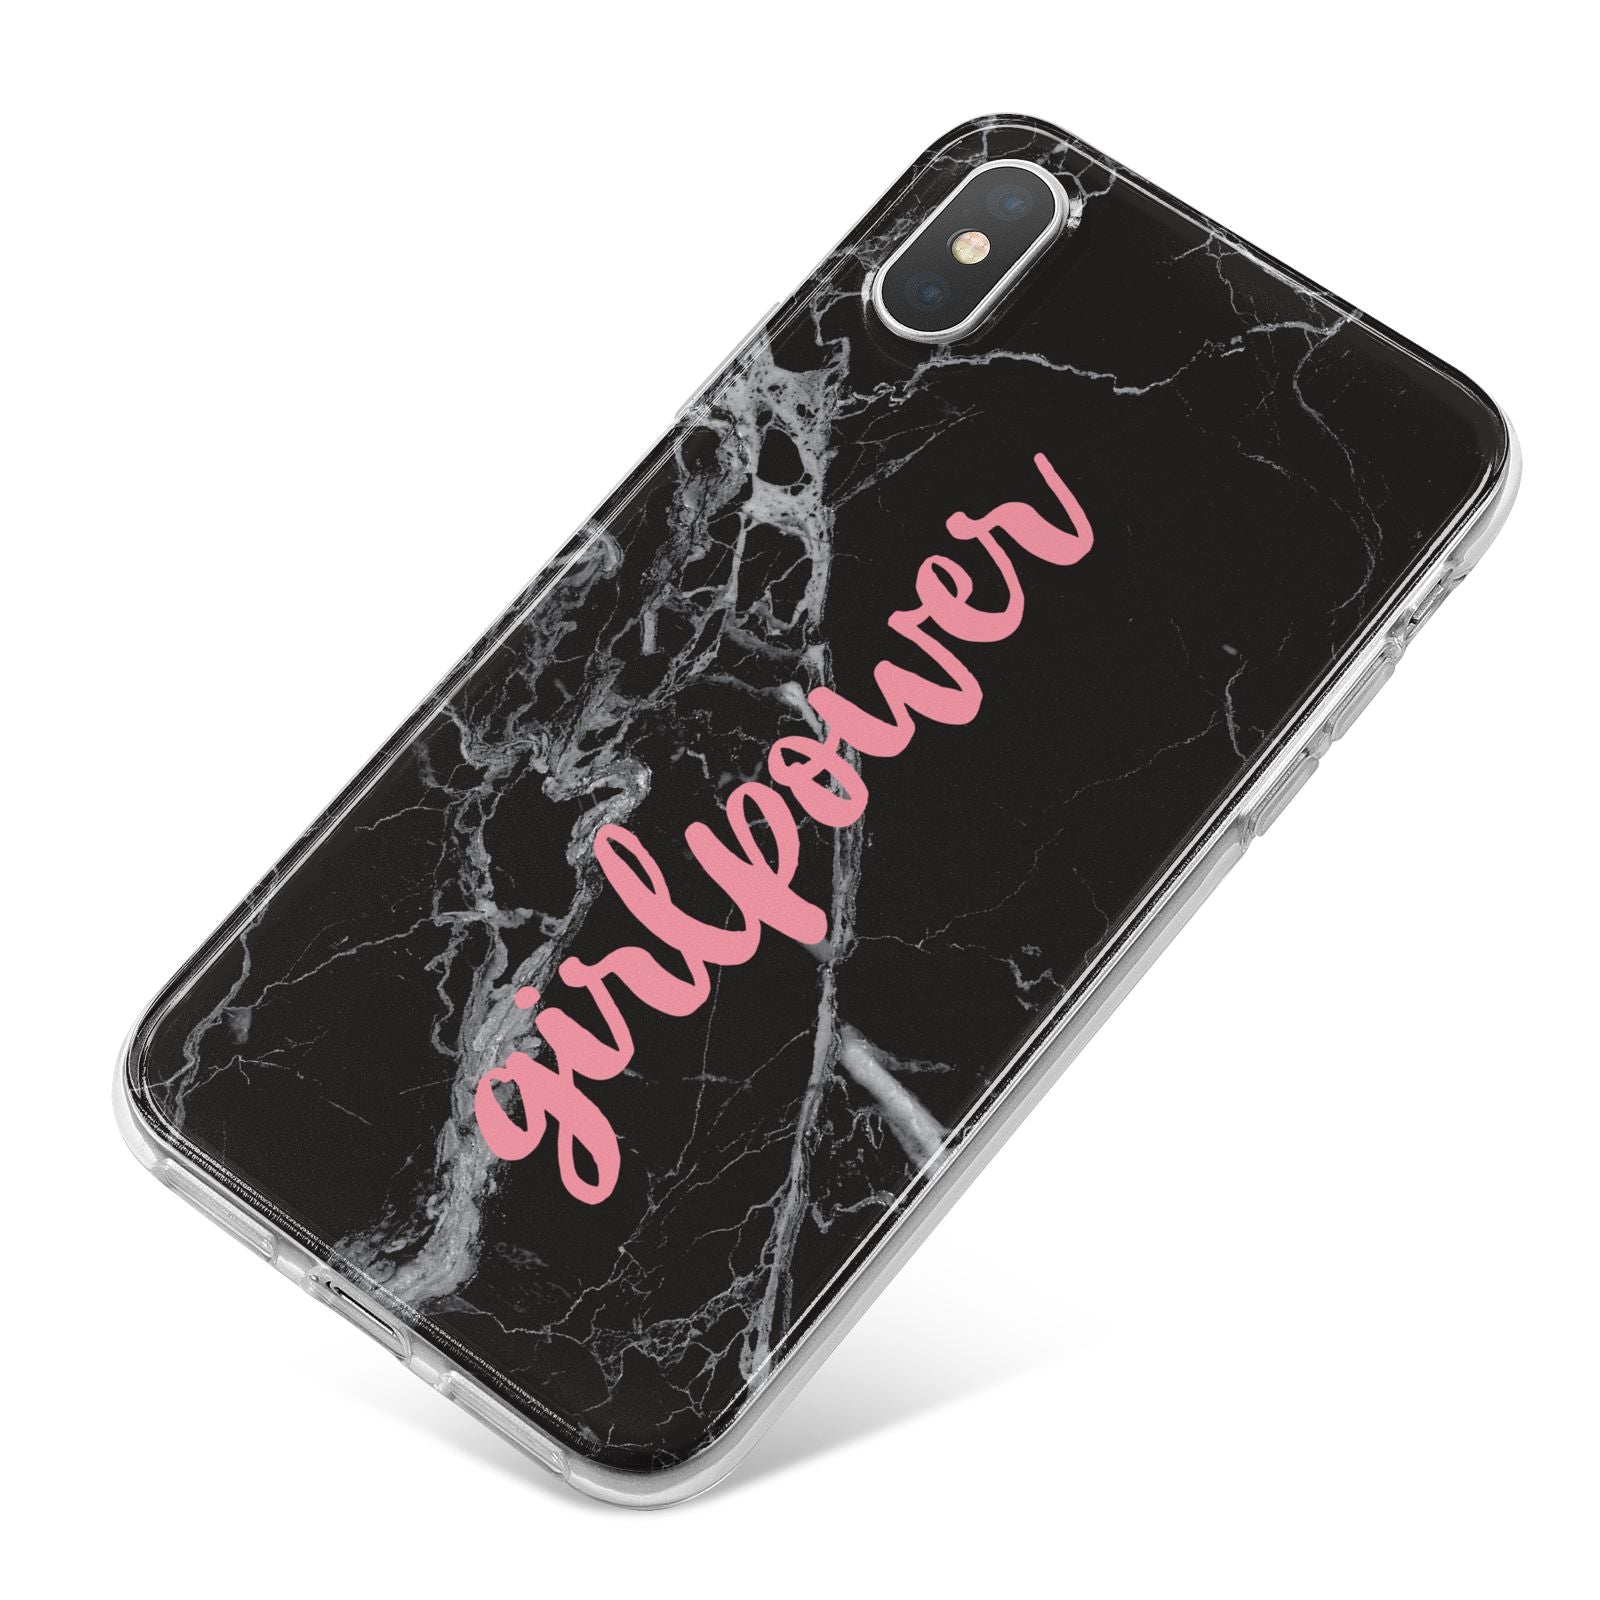 Girlpower Black White Marble Effect iPhone X Bumper Case on Silver iPhone